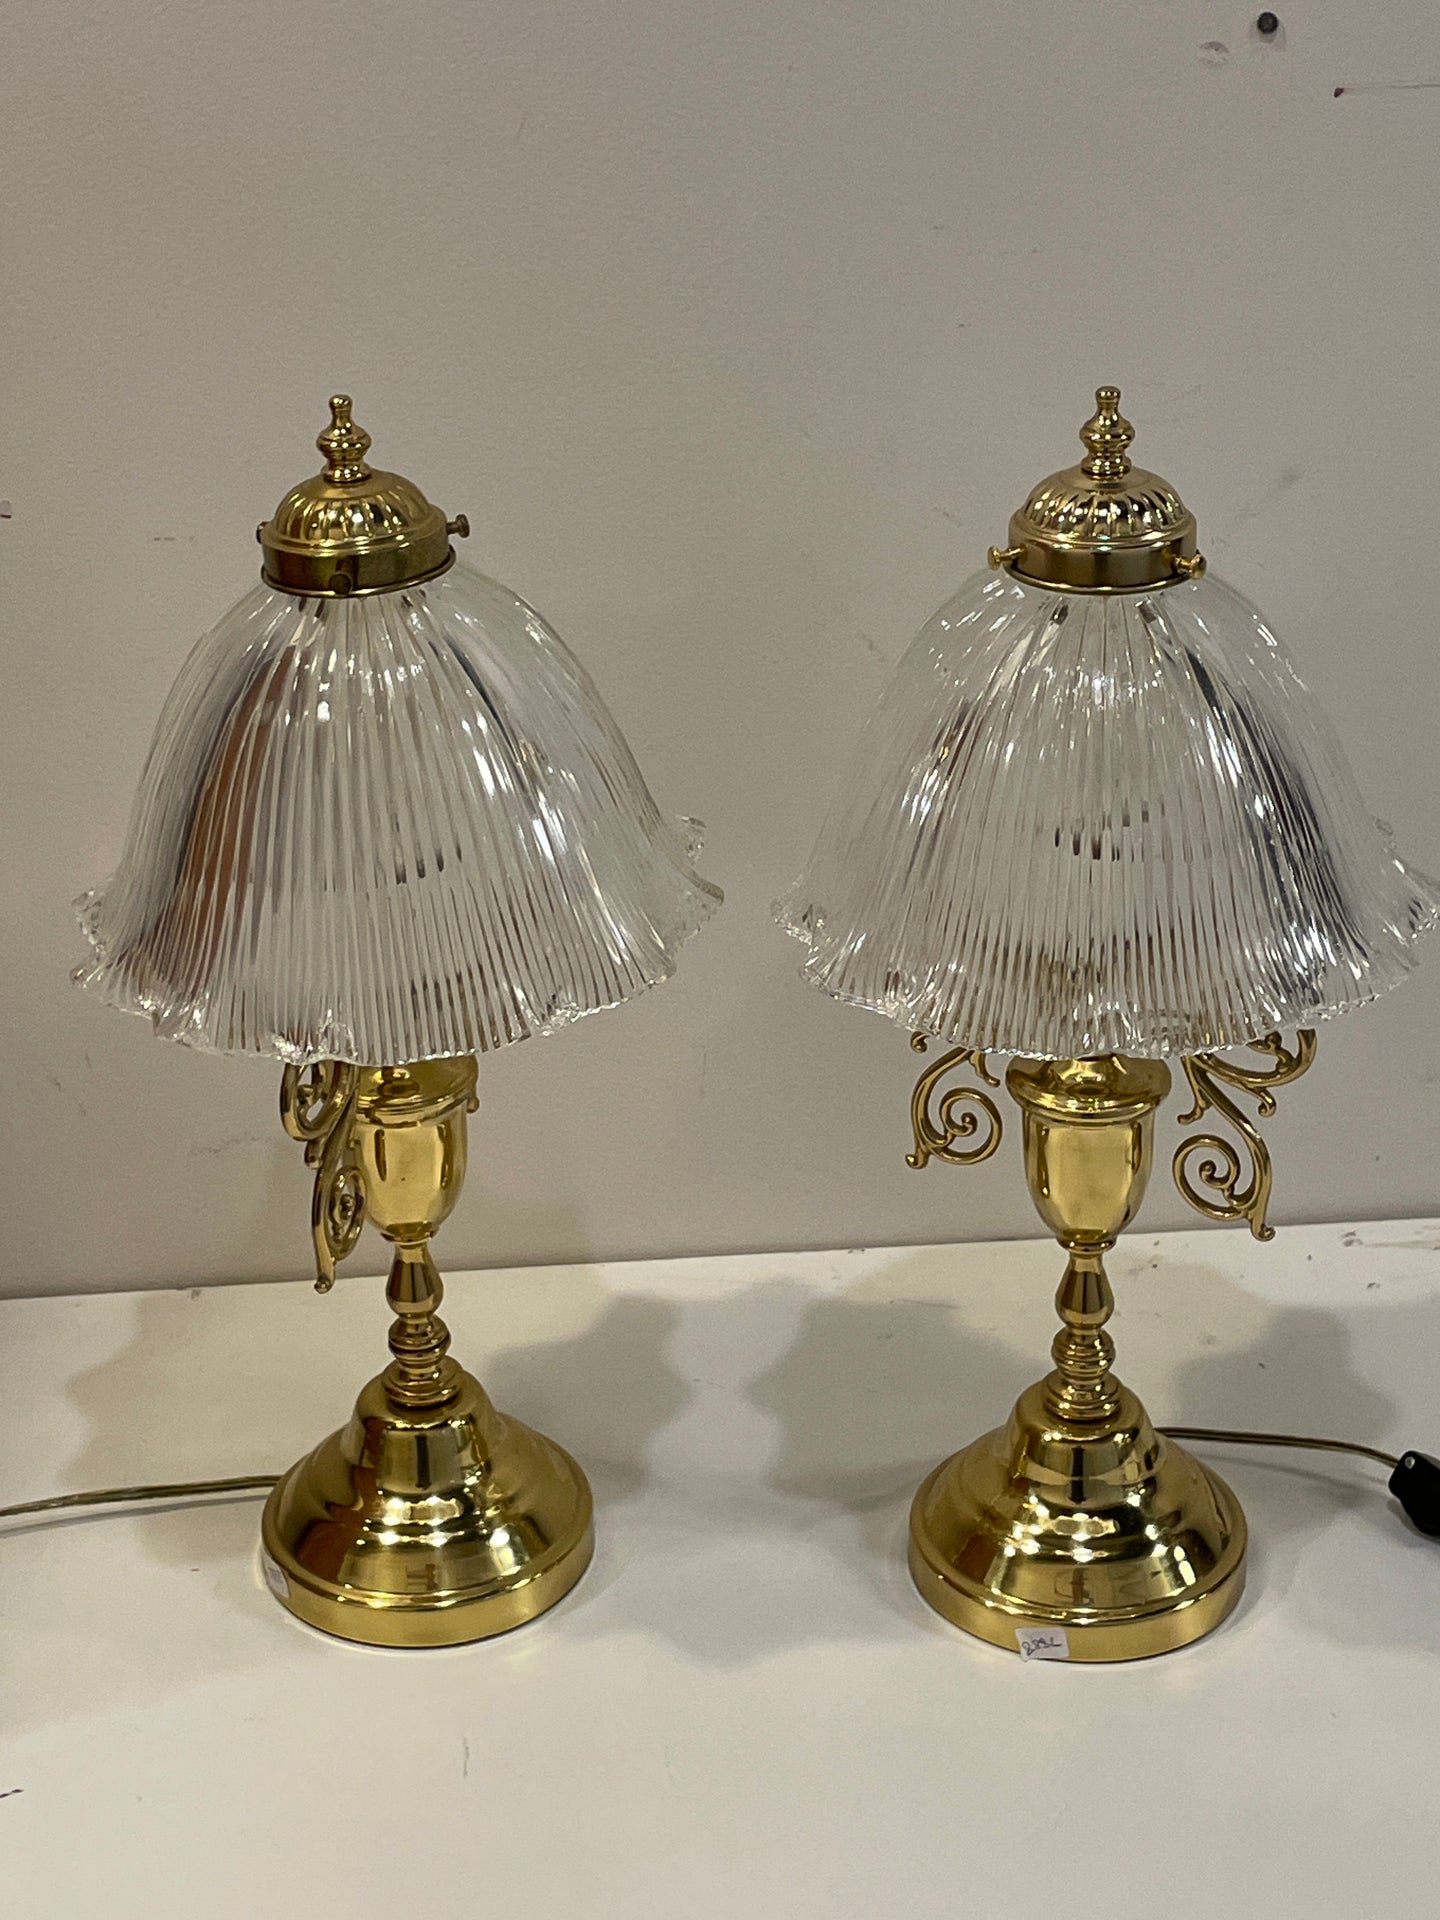 Pair of Vintage Brass Lamps with Dome Glass Shades